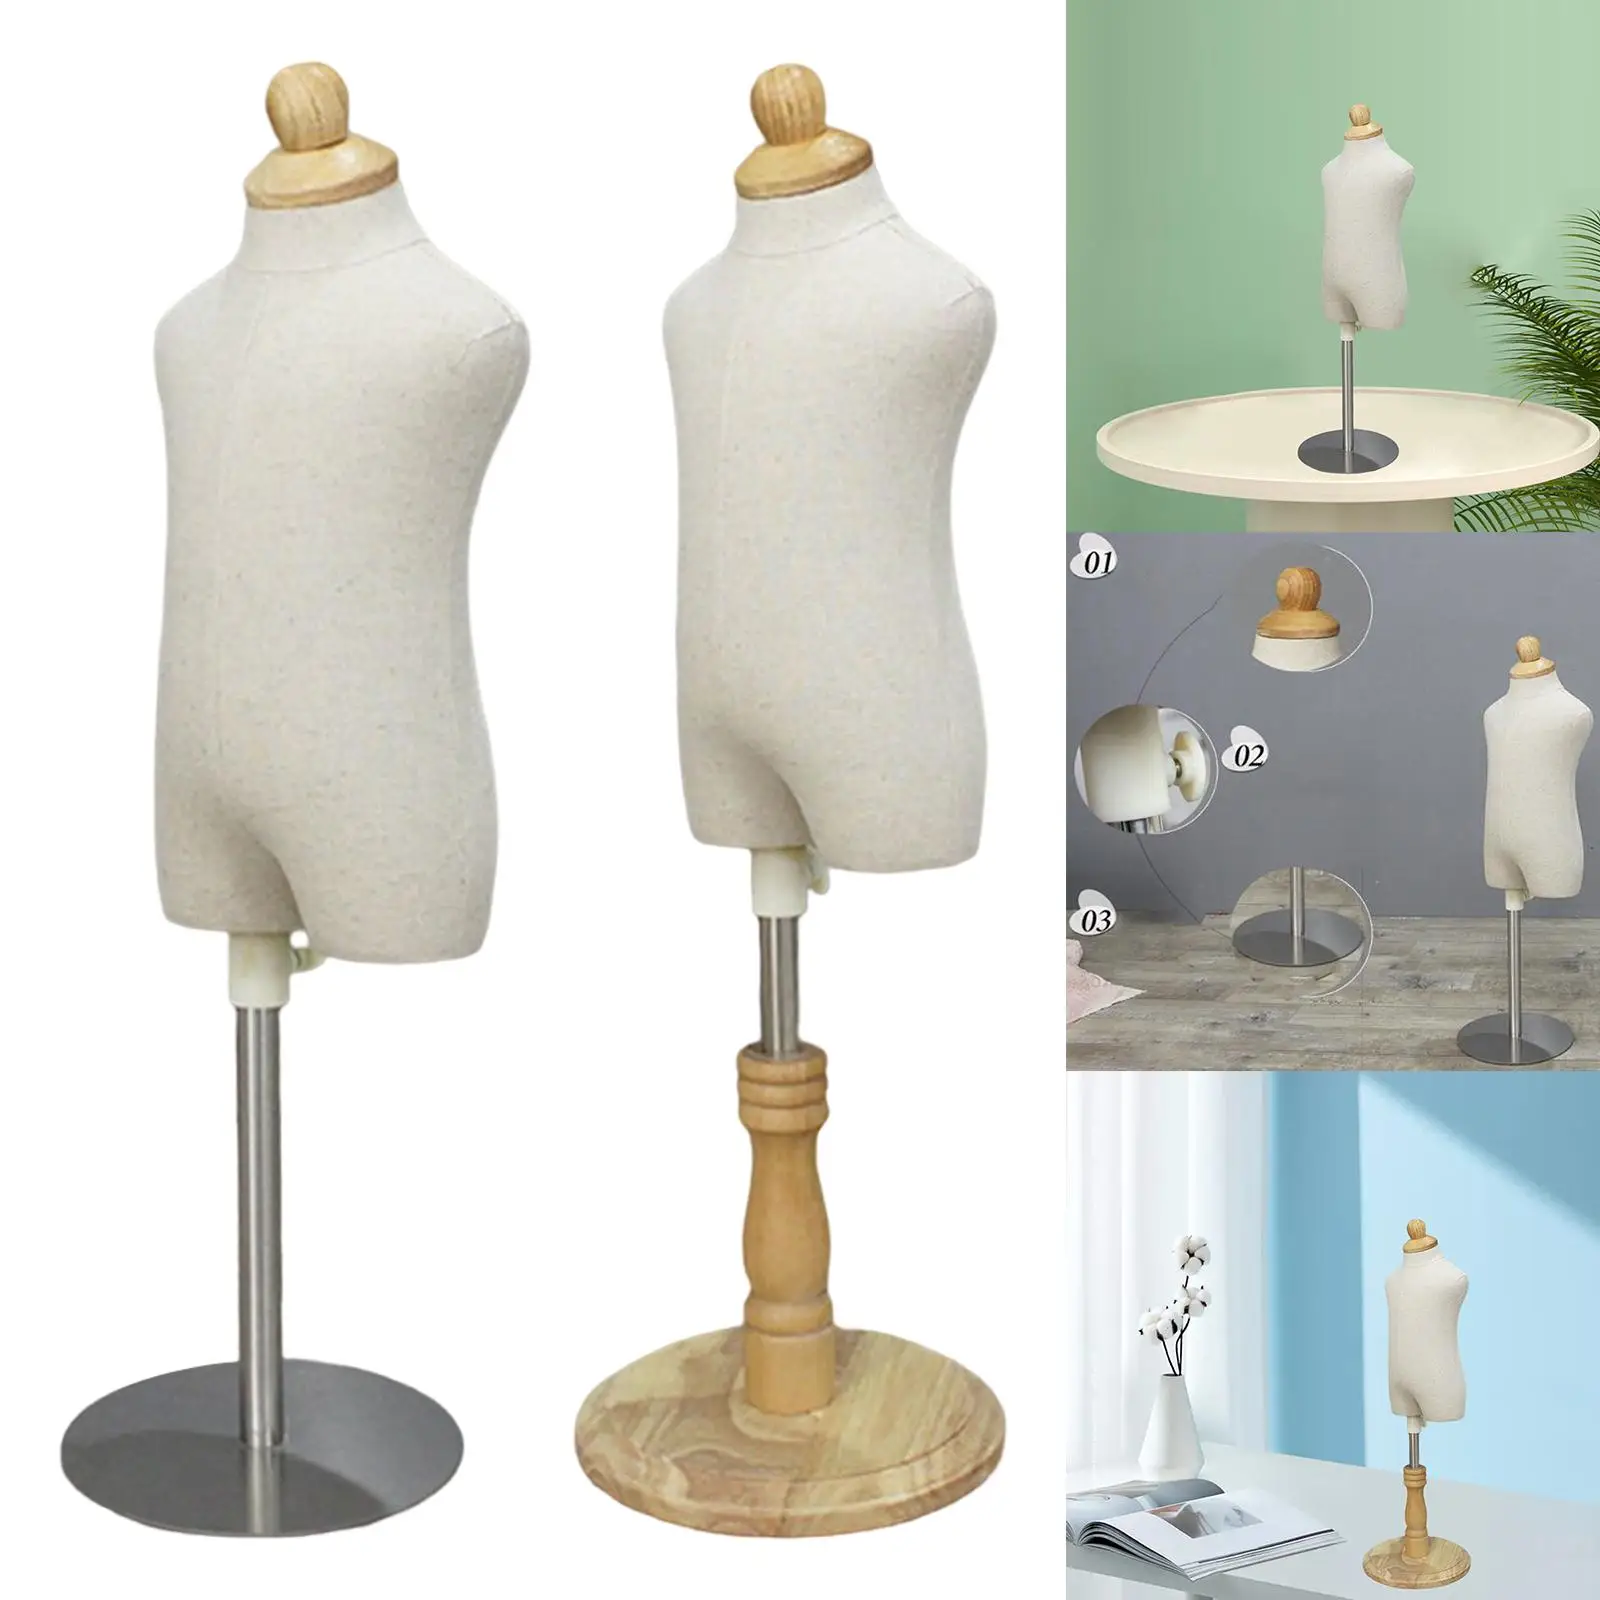 BEIYANG Child Mannequin Torso Dress Form Display Stand Designer Pattern Model Props Clothing Store Window Display Rack Head+Wood arm+Silver Square Base 4T 